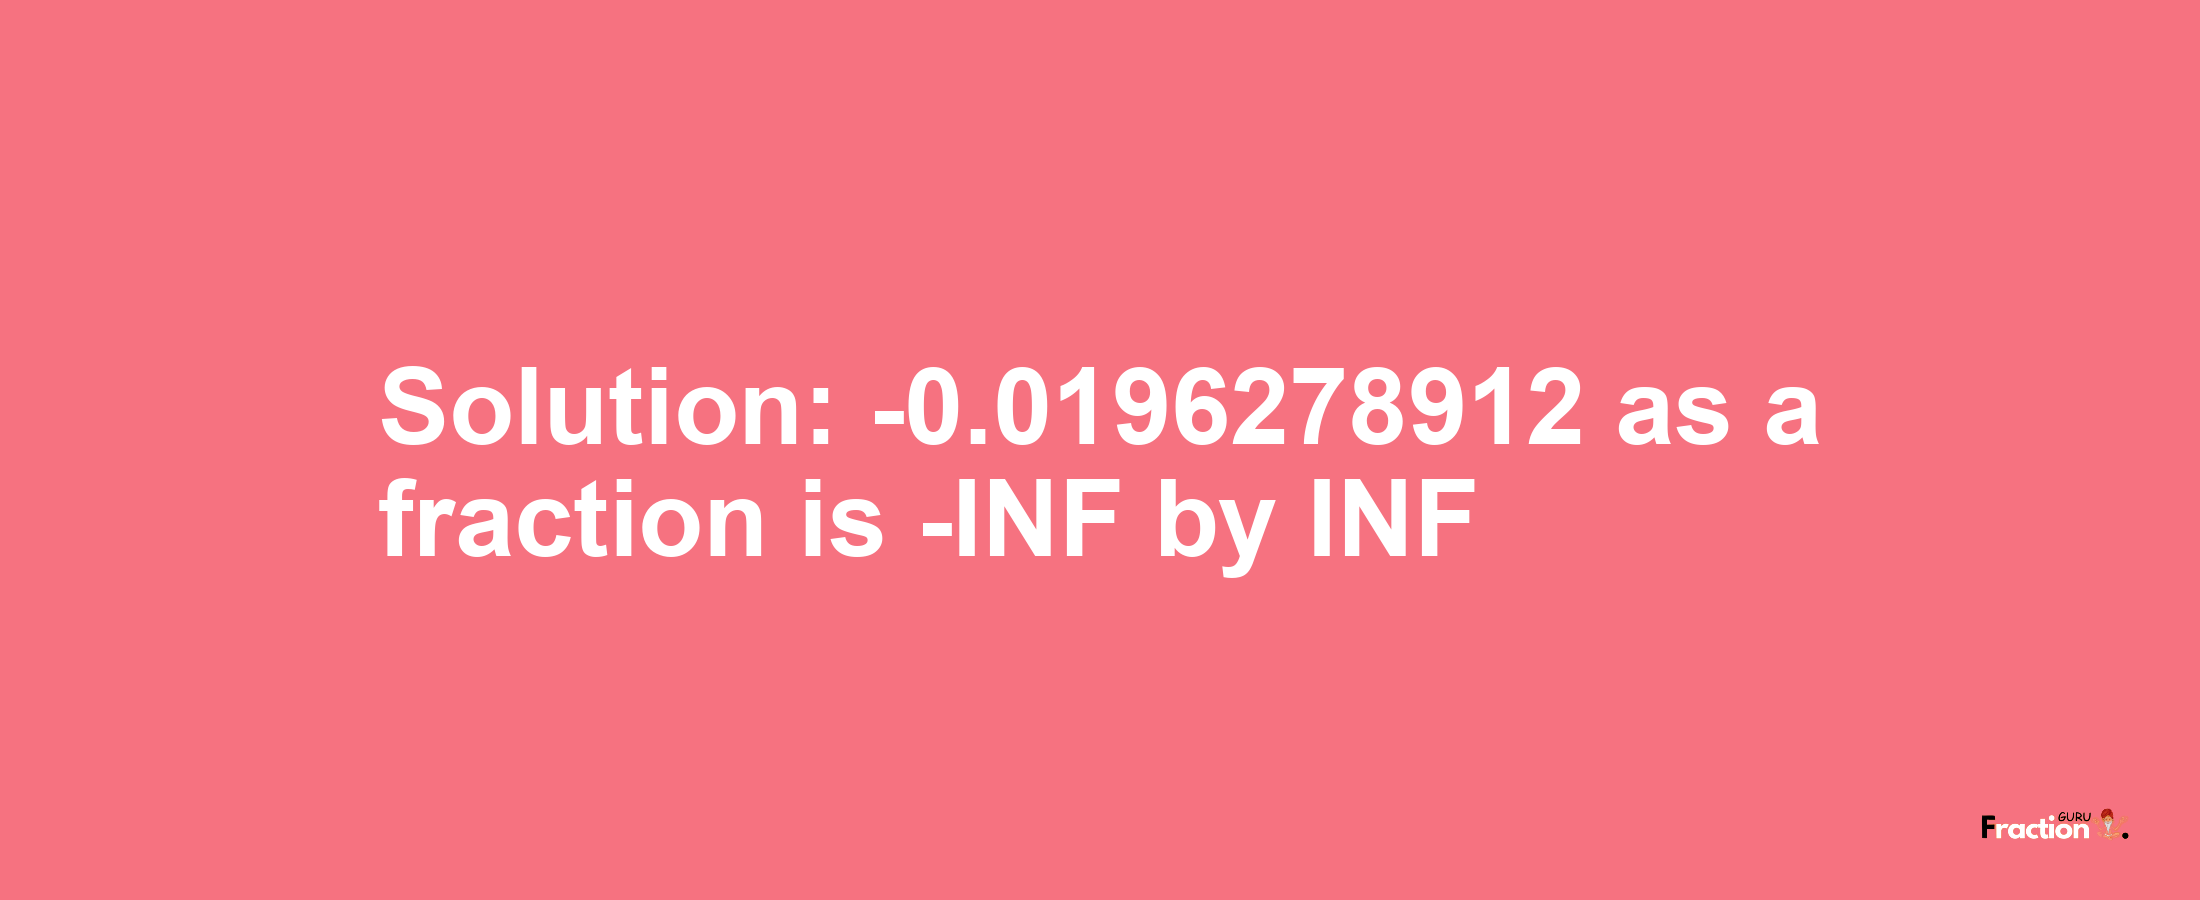 Solution:-0.0196278912 as a fraction is -INF/INF